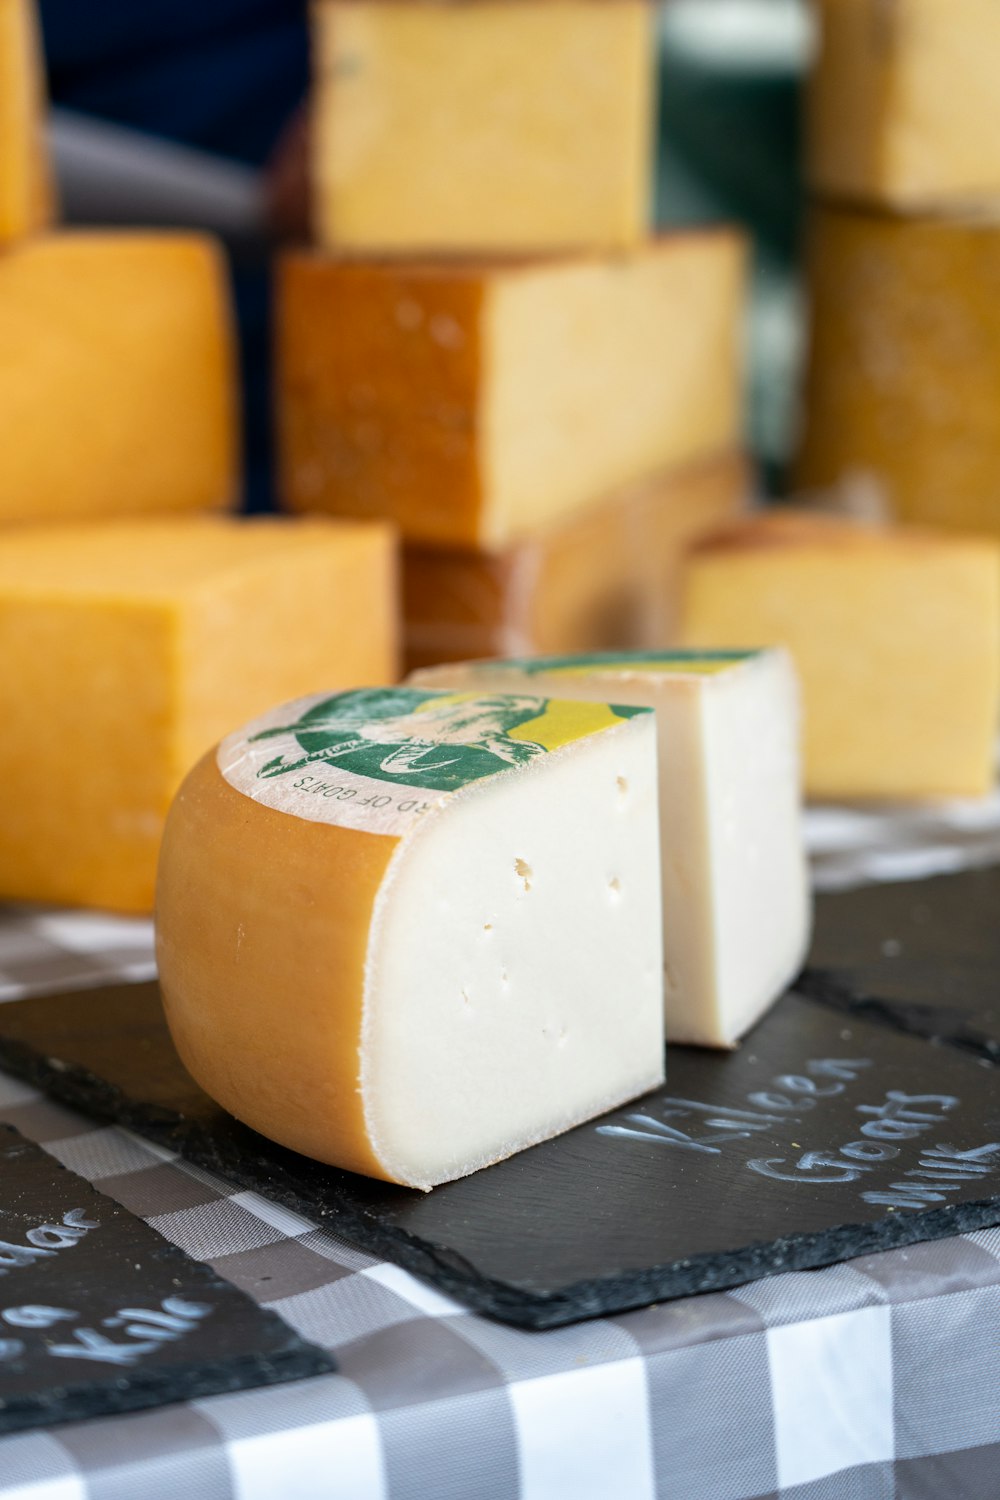 a close-up of some cheese